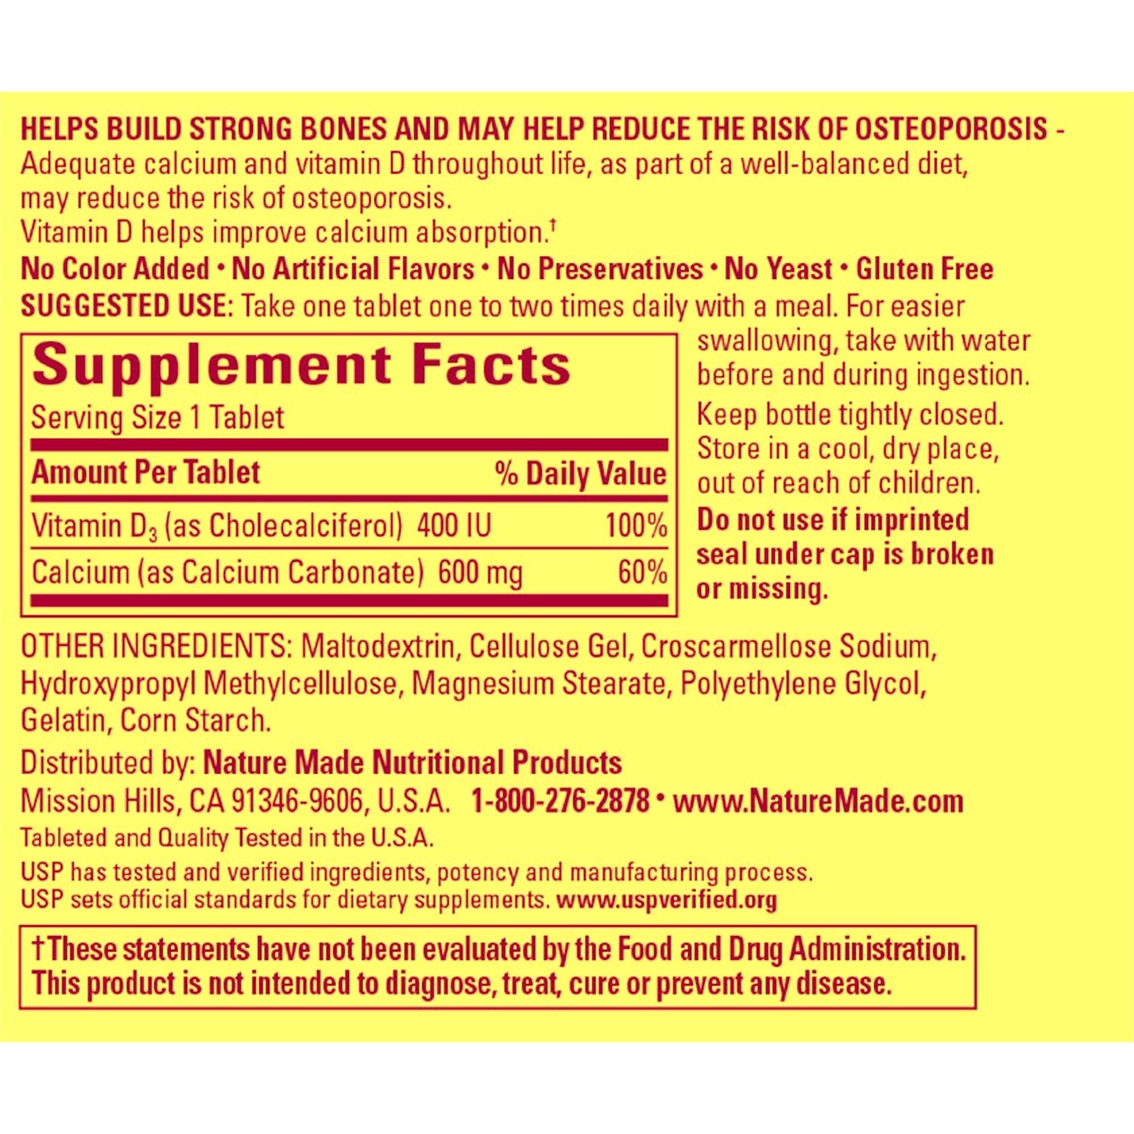 Nature Made Calcium 600mg Tablets 220 ct. - Image 2 of 2